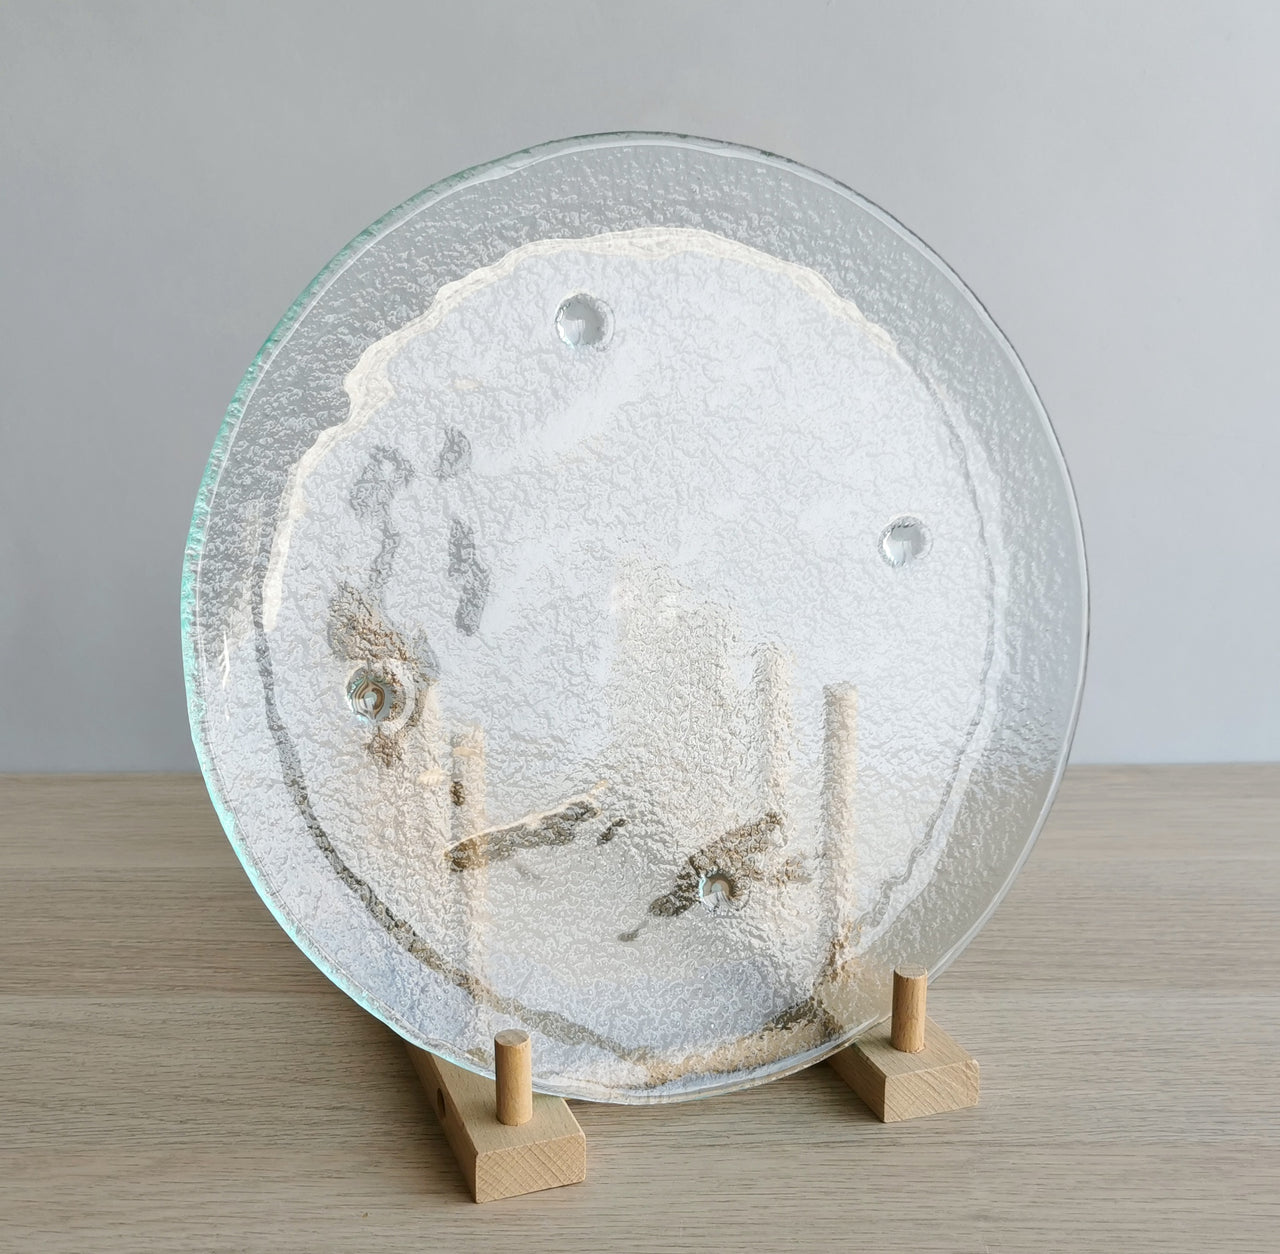 Merry Minimalist Clear Glass Main Course Plate. Transparent Glass Plate - 10 1/4" (26cm.)